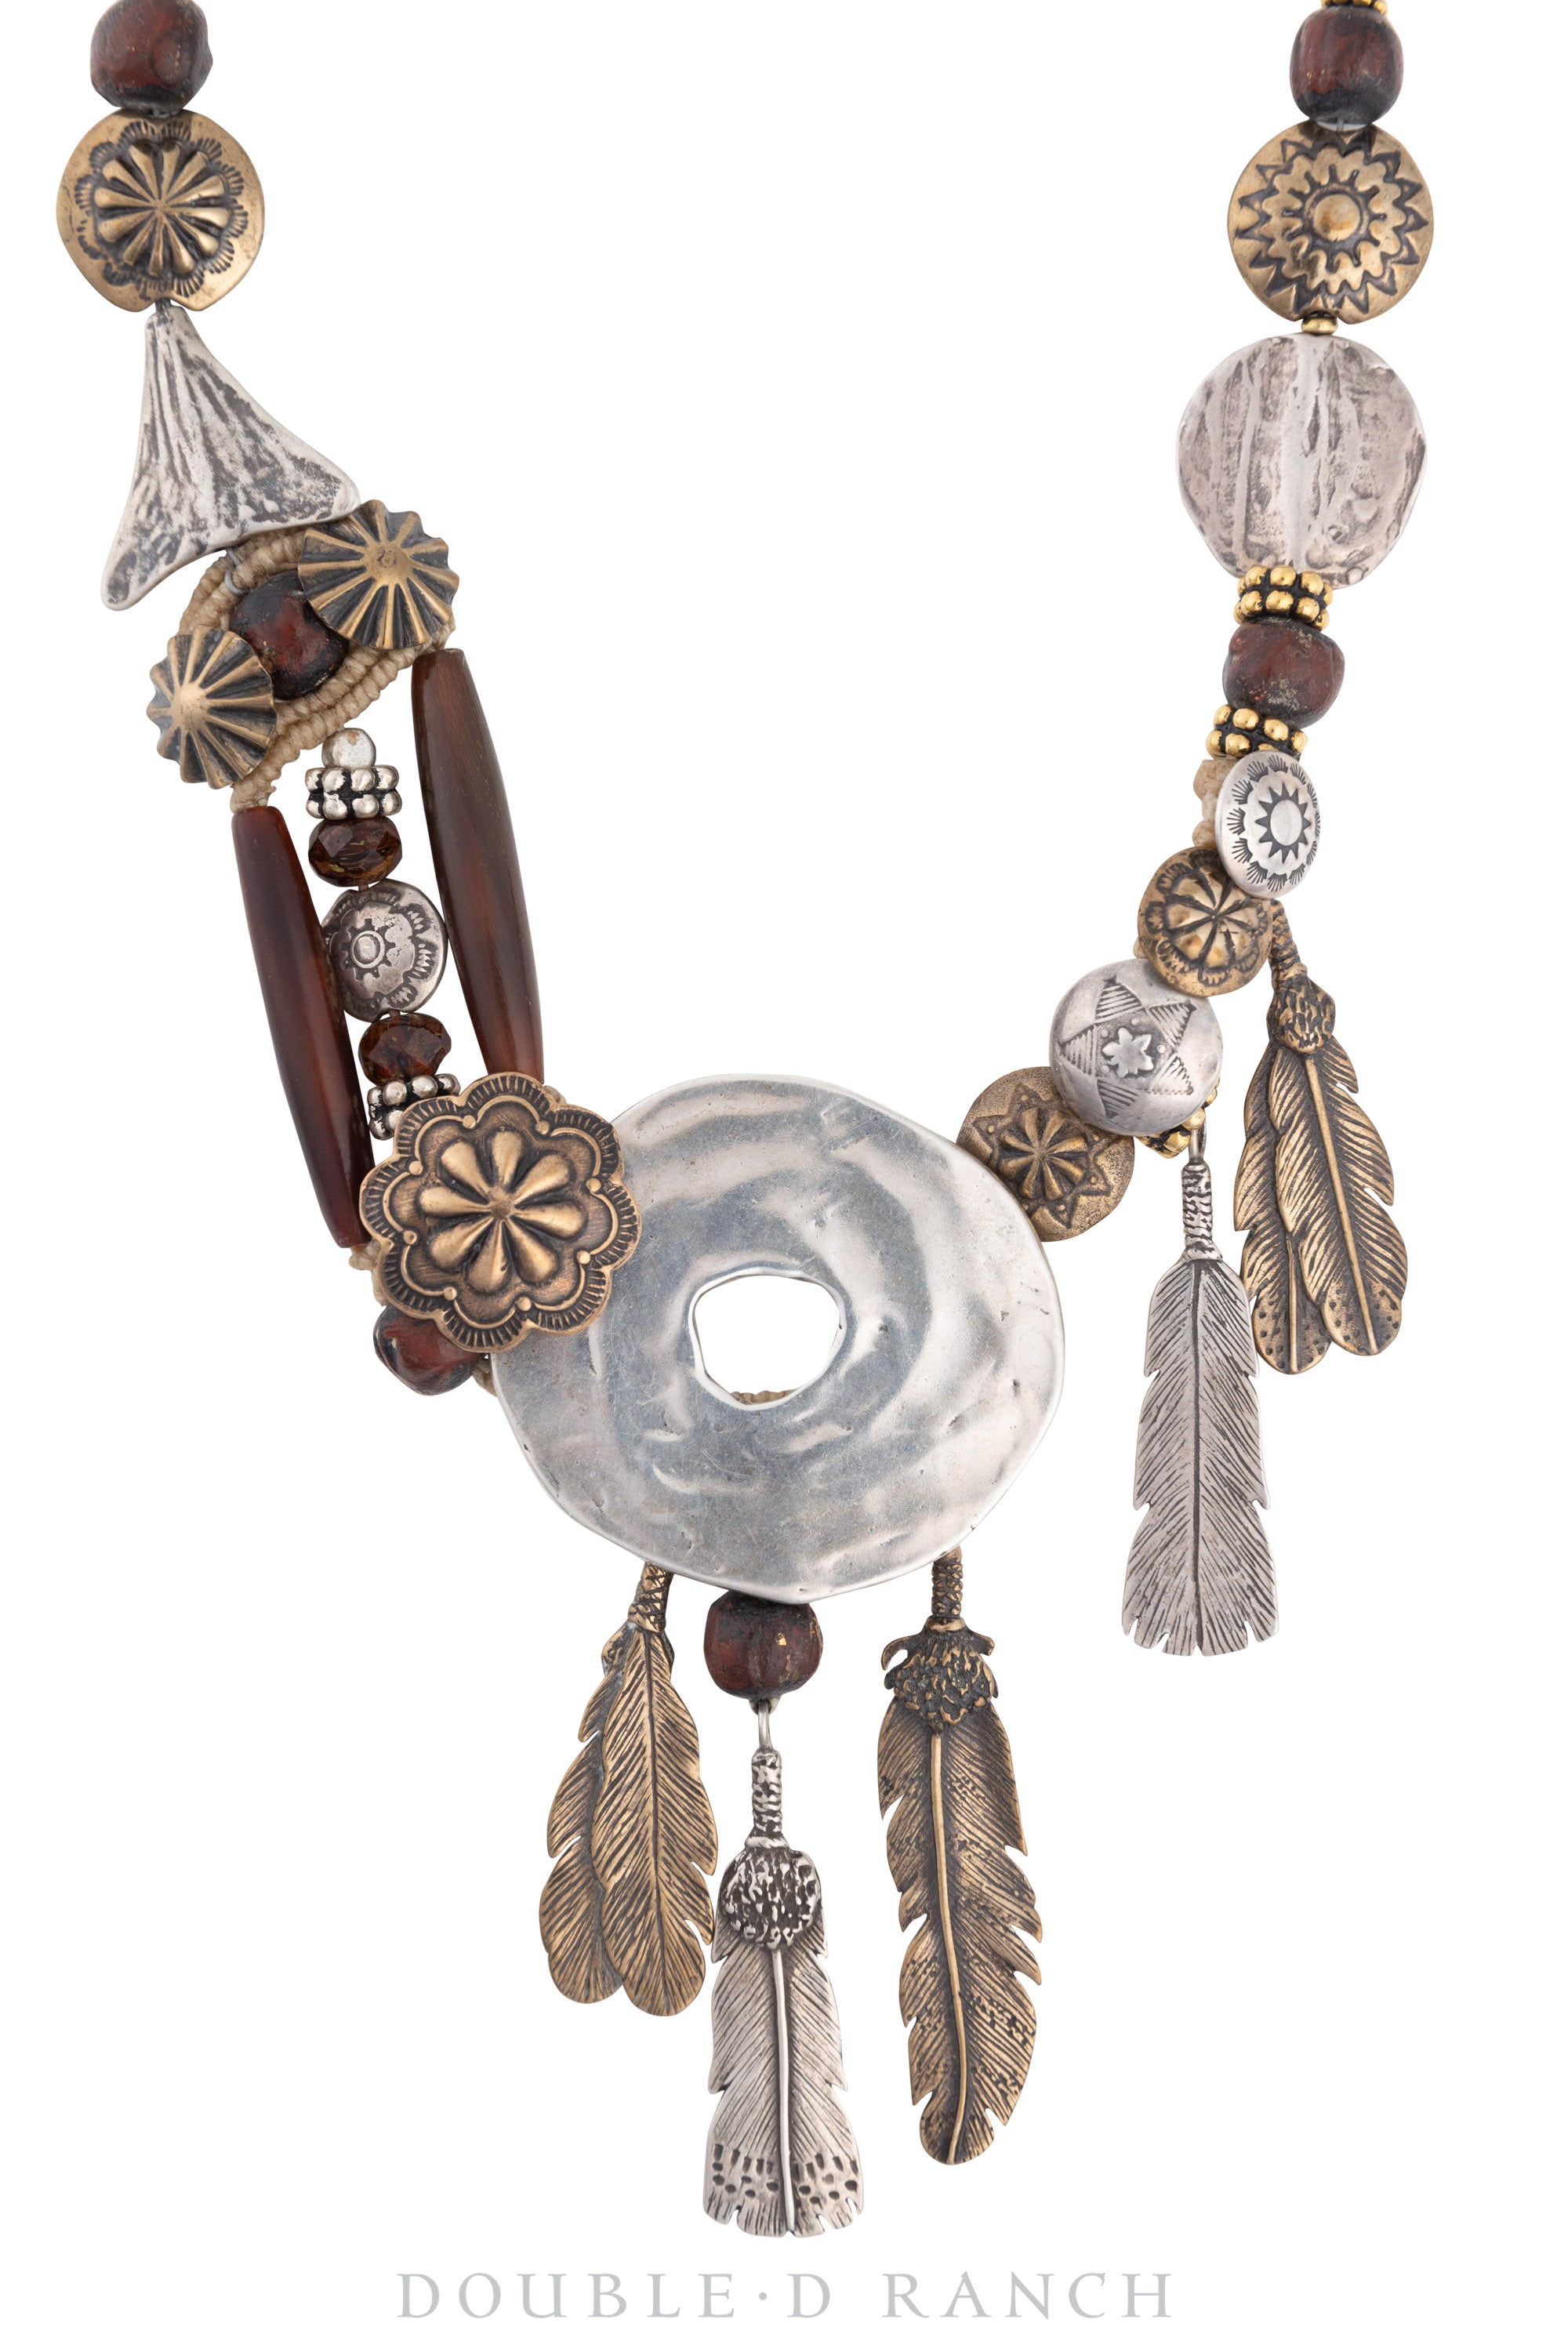 Necklace, Mummy's Bundle, Hairpipe & Feathers, Vintage, 3119